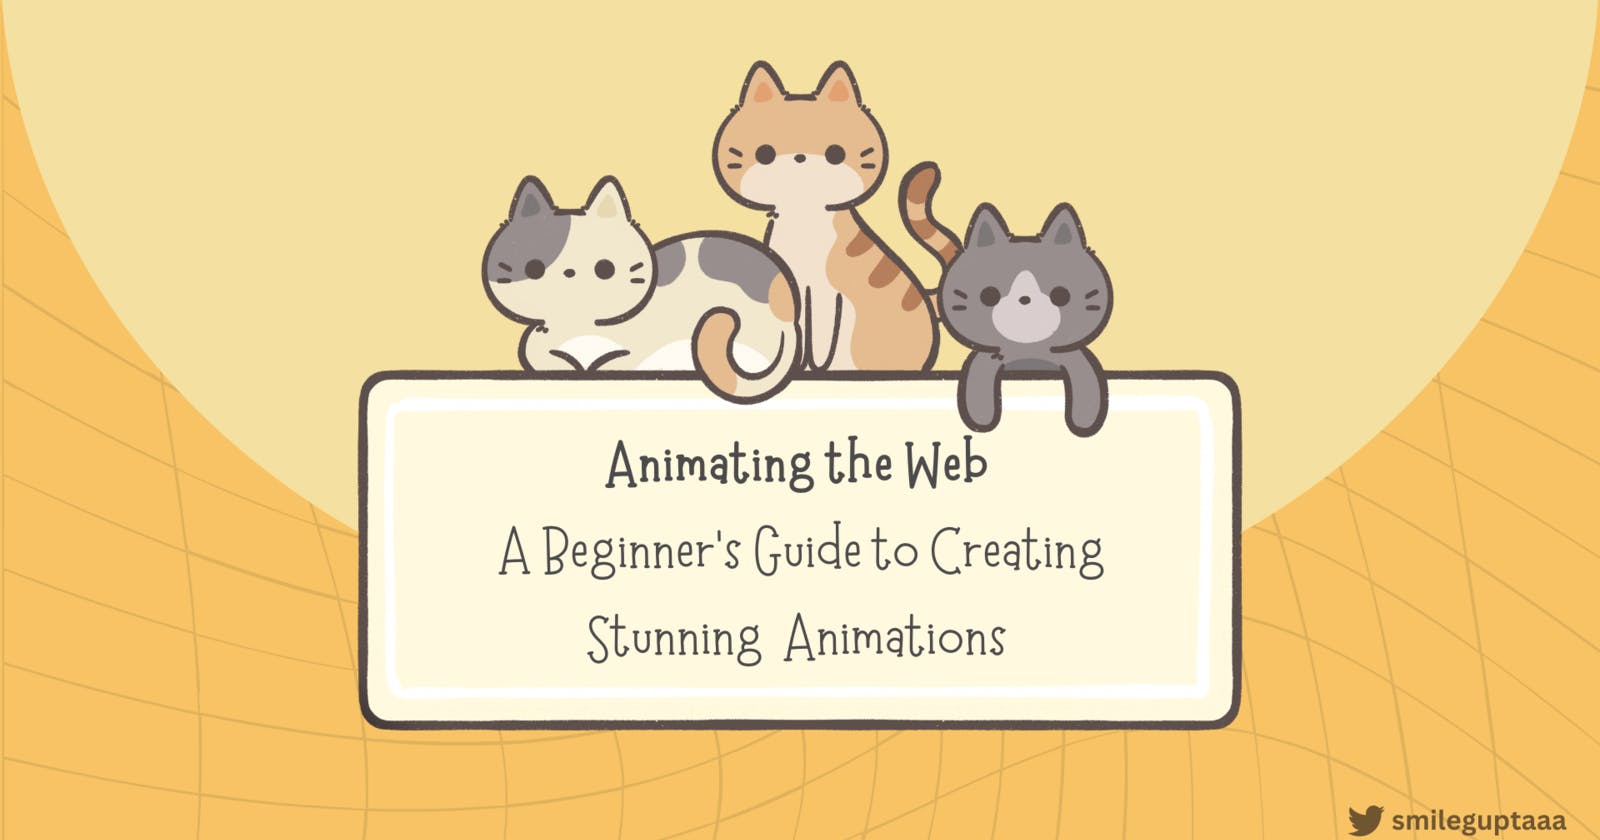 Animating the Web: A Beginner's Guide to Creating Stunning Animations